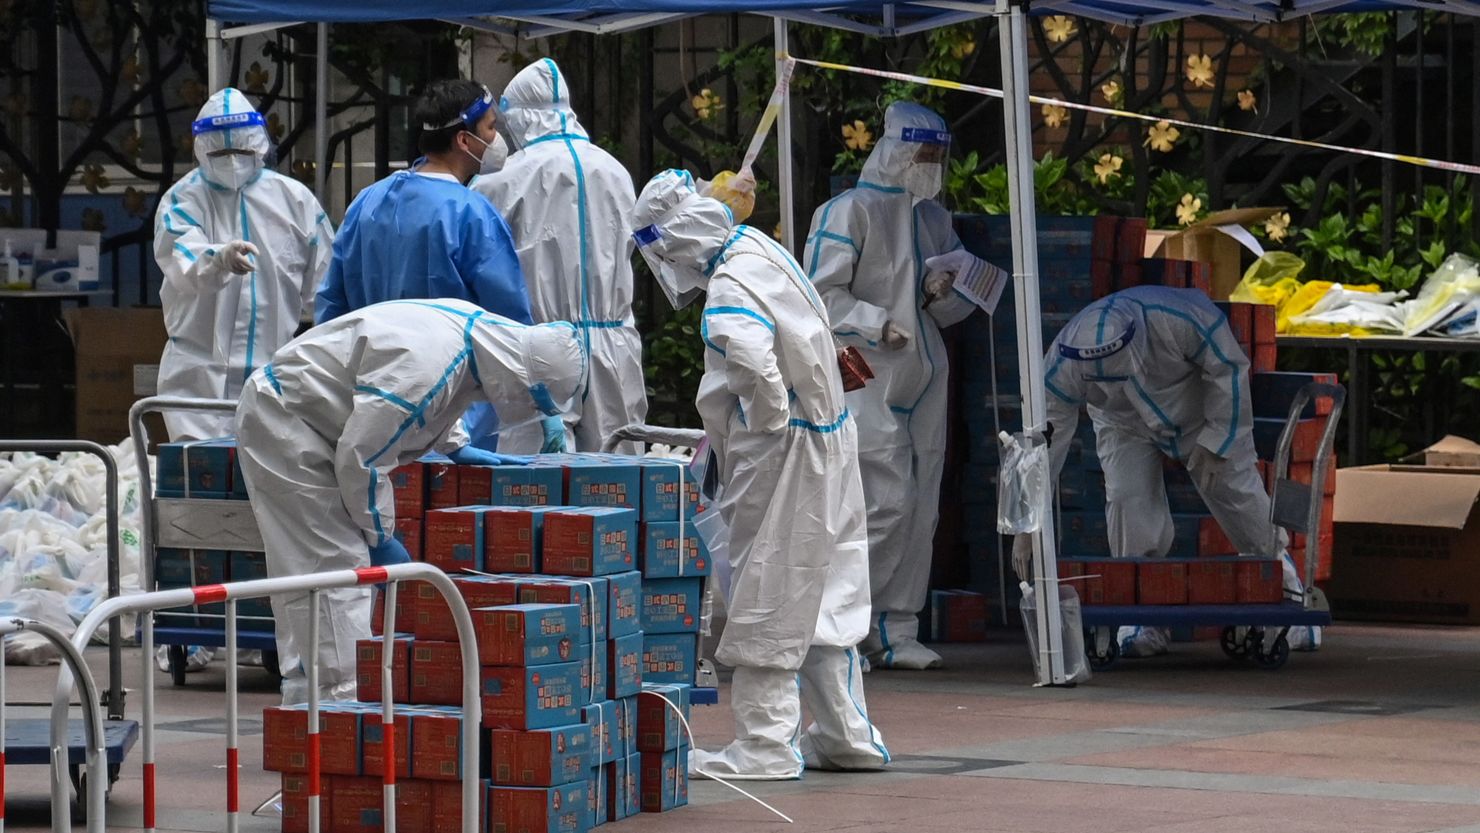 Workers wearing personal protective equipment are seen next to food delivered by the local government for residents in a compound during a Covid-19 lockdown in the Jing'an district in Shanghai on April 10, 2022.